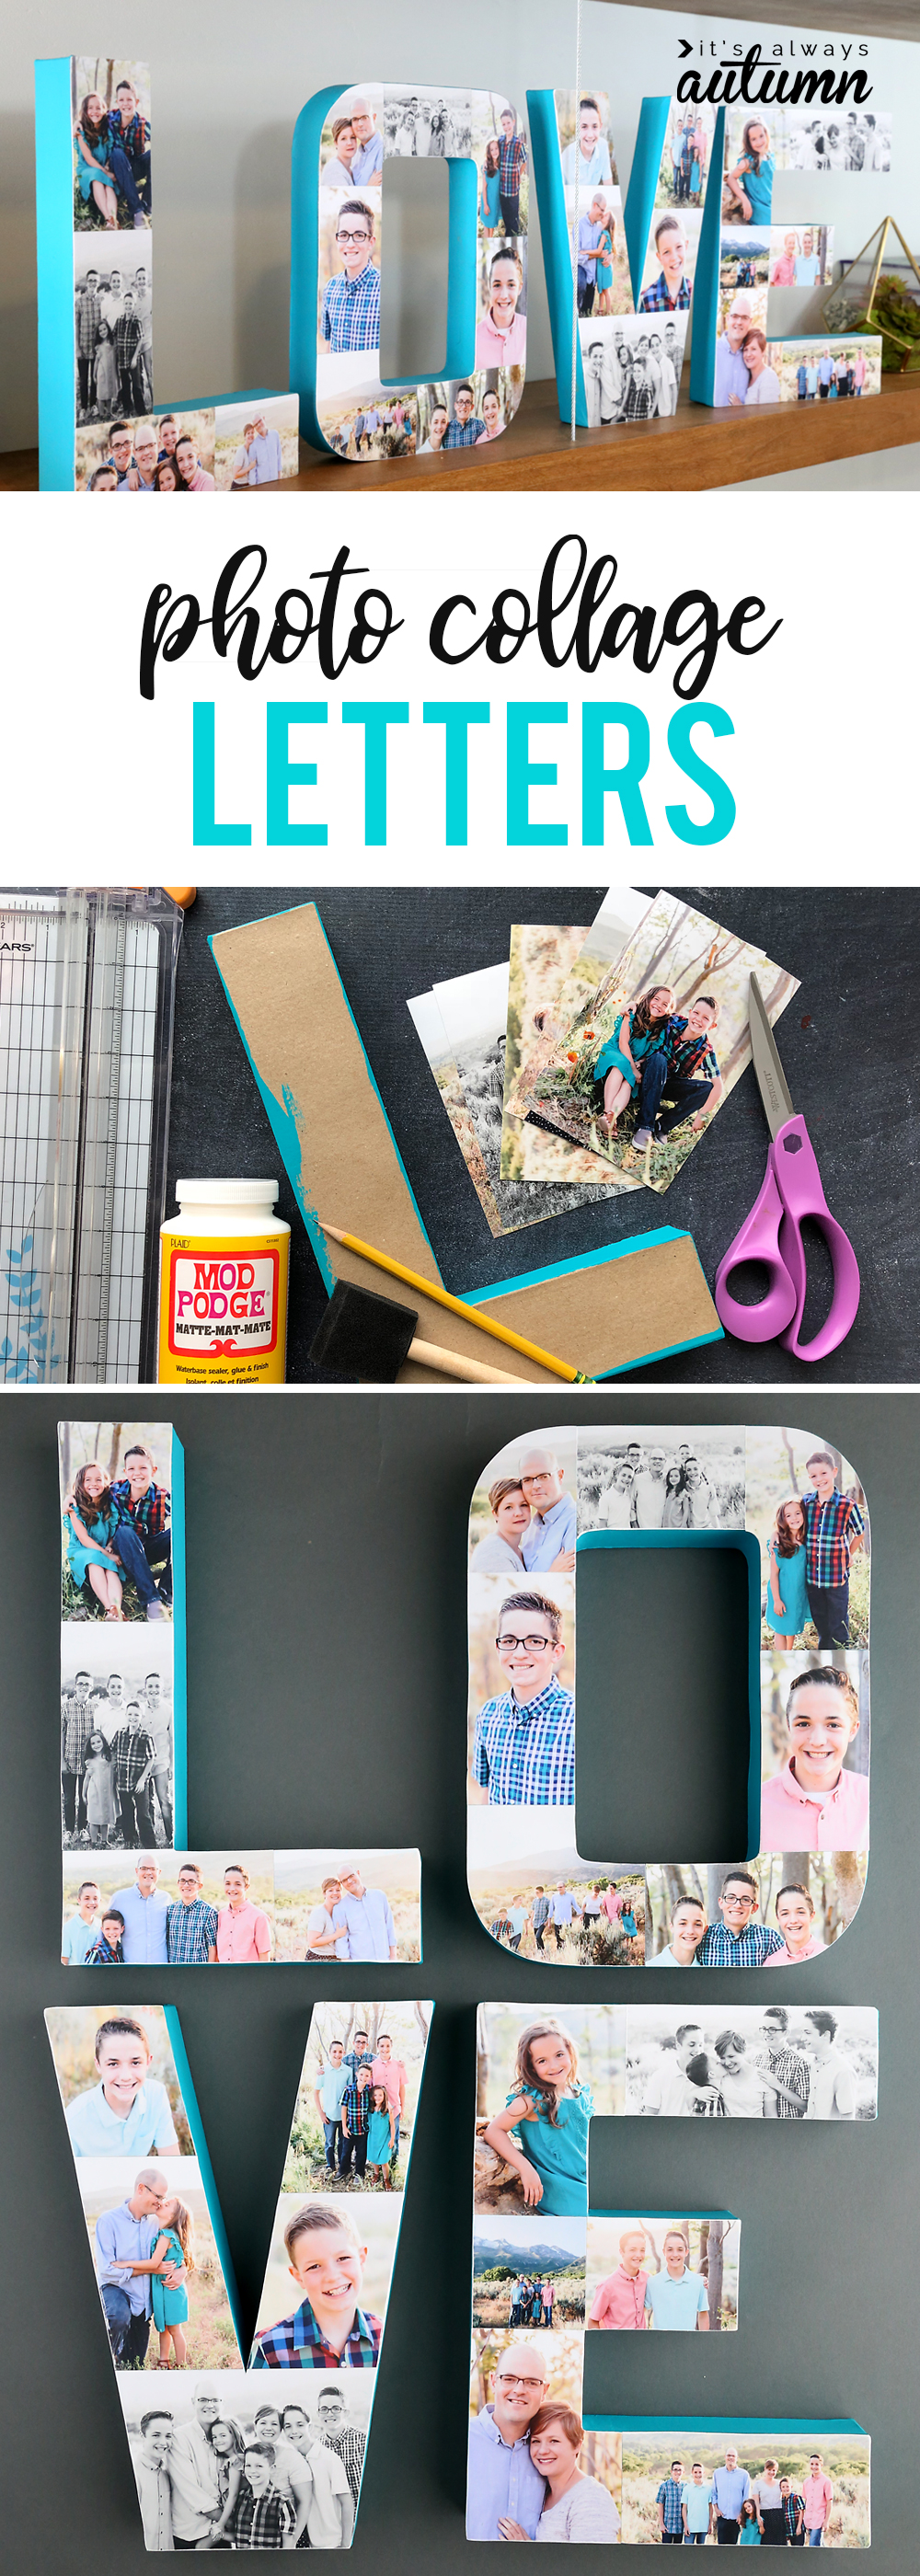 Collage: paper mache letters covered with photos, supplies for making photo letters